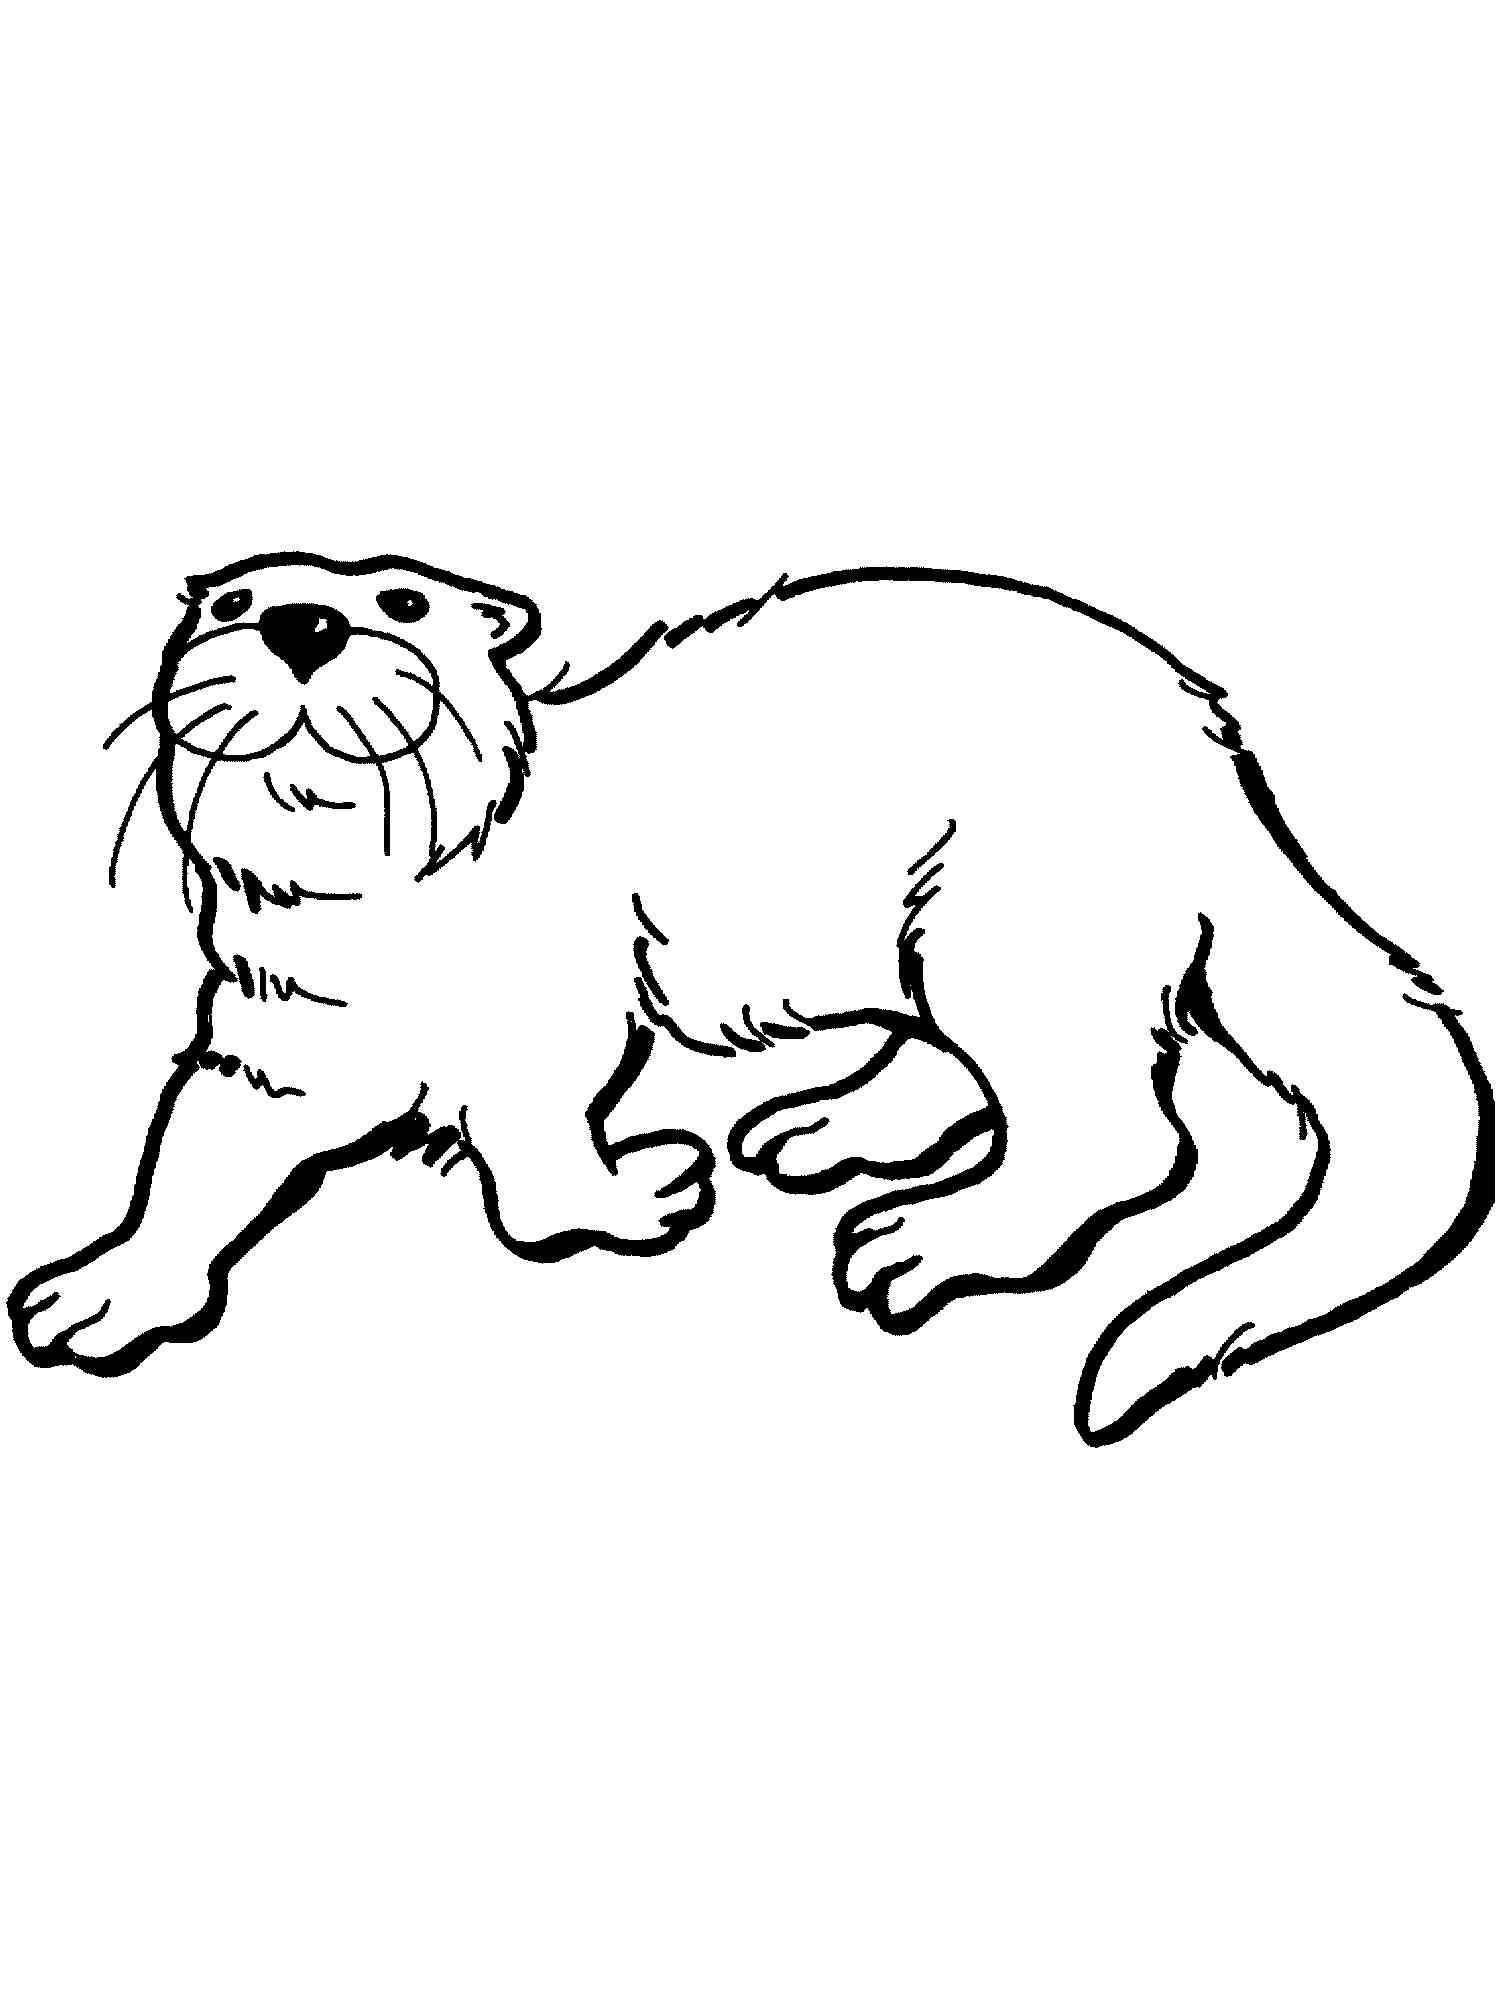 Funny Otter coloring page